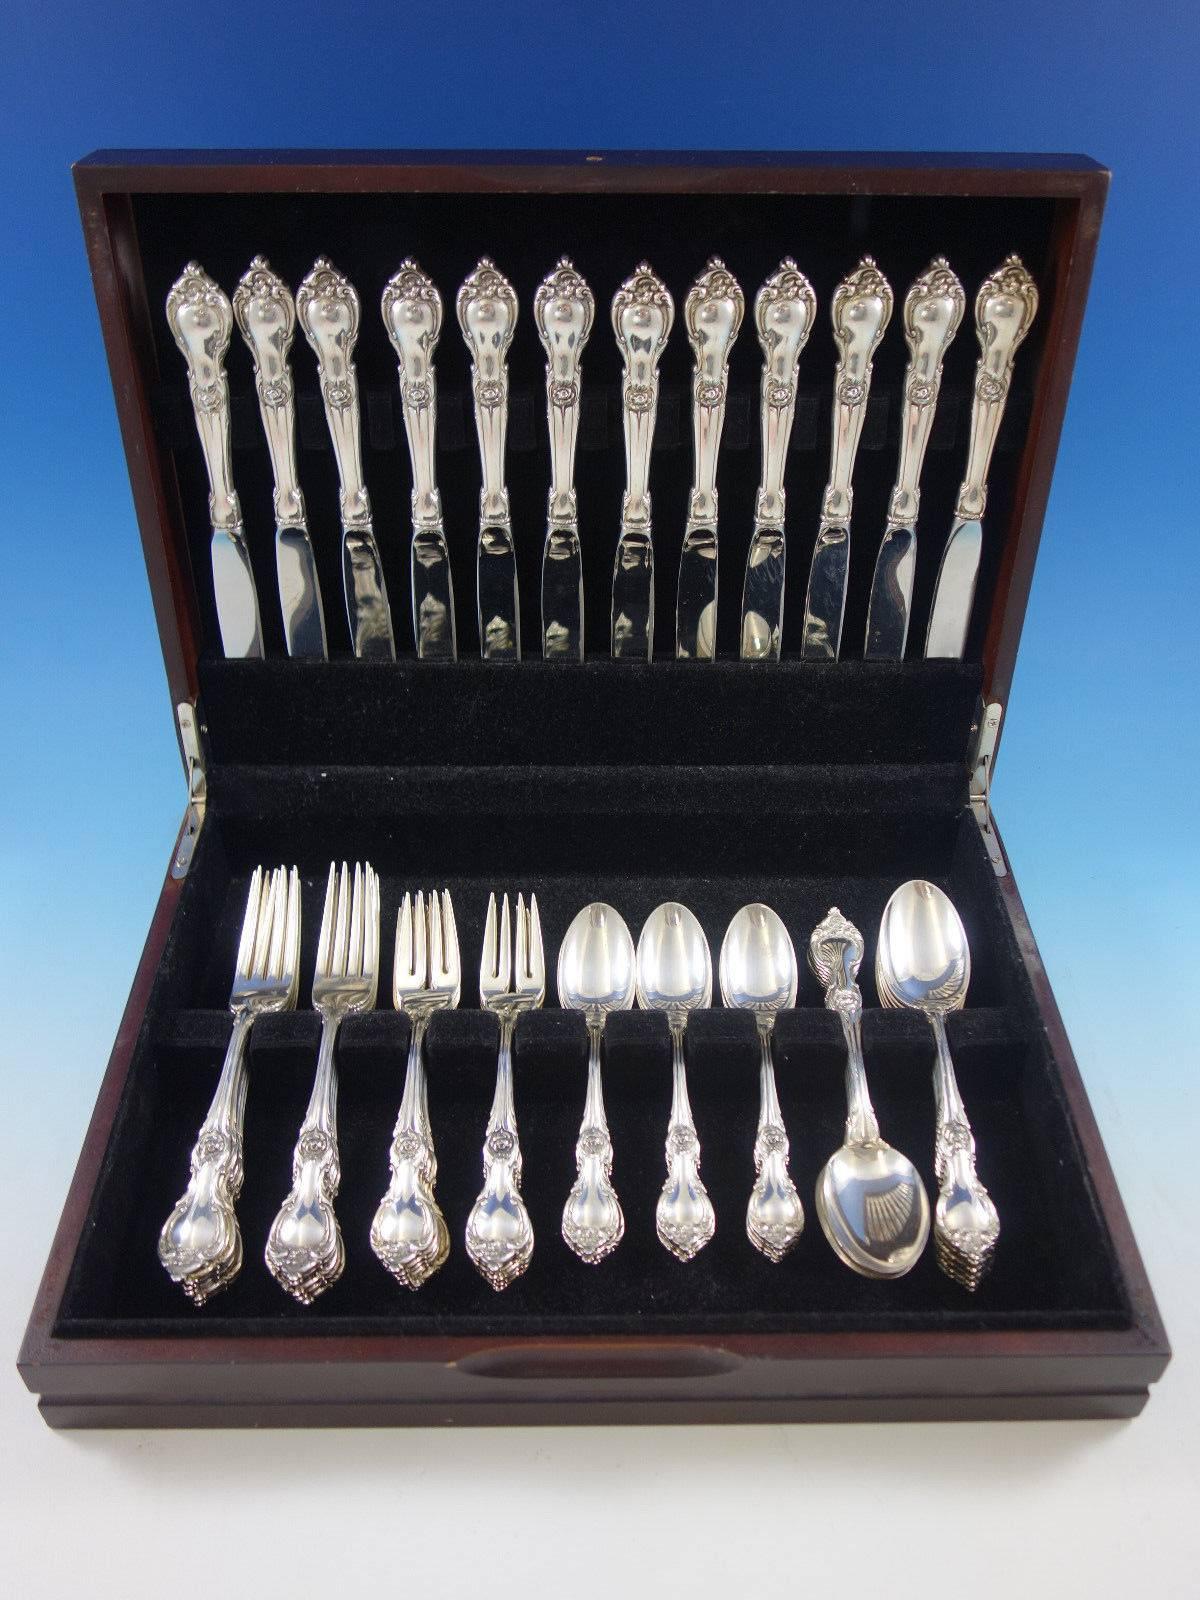 Alexandra by Lunt sterling silver flatware set, 60 pieces. This set includes: 

12 knives, 9